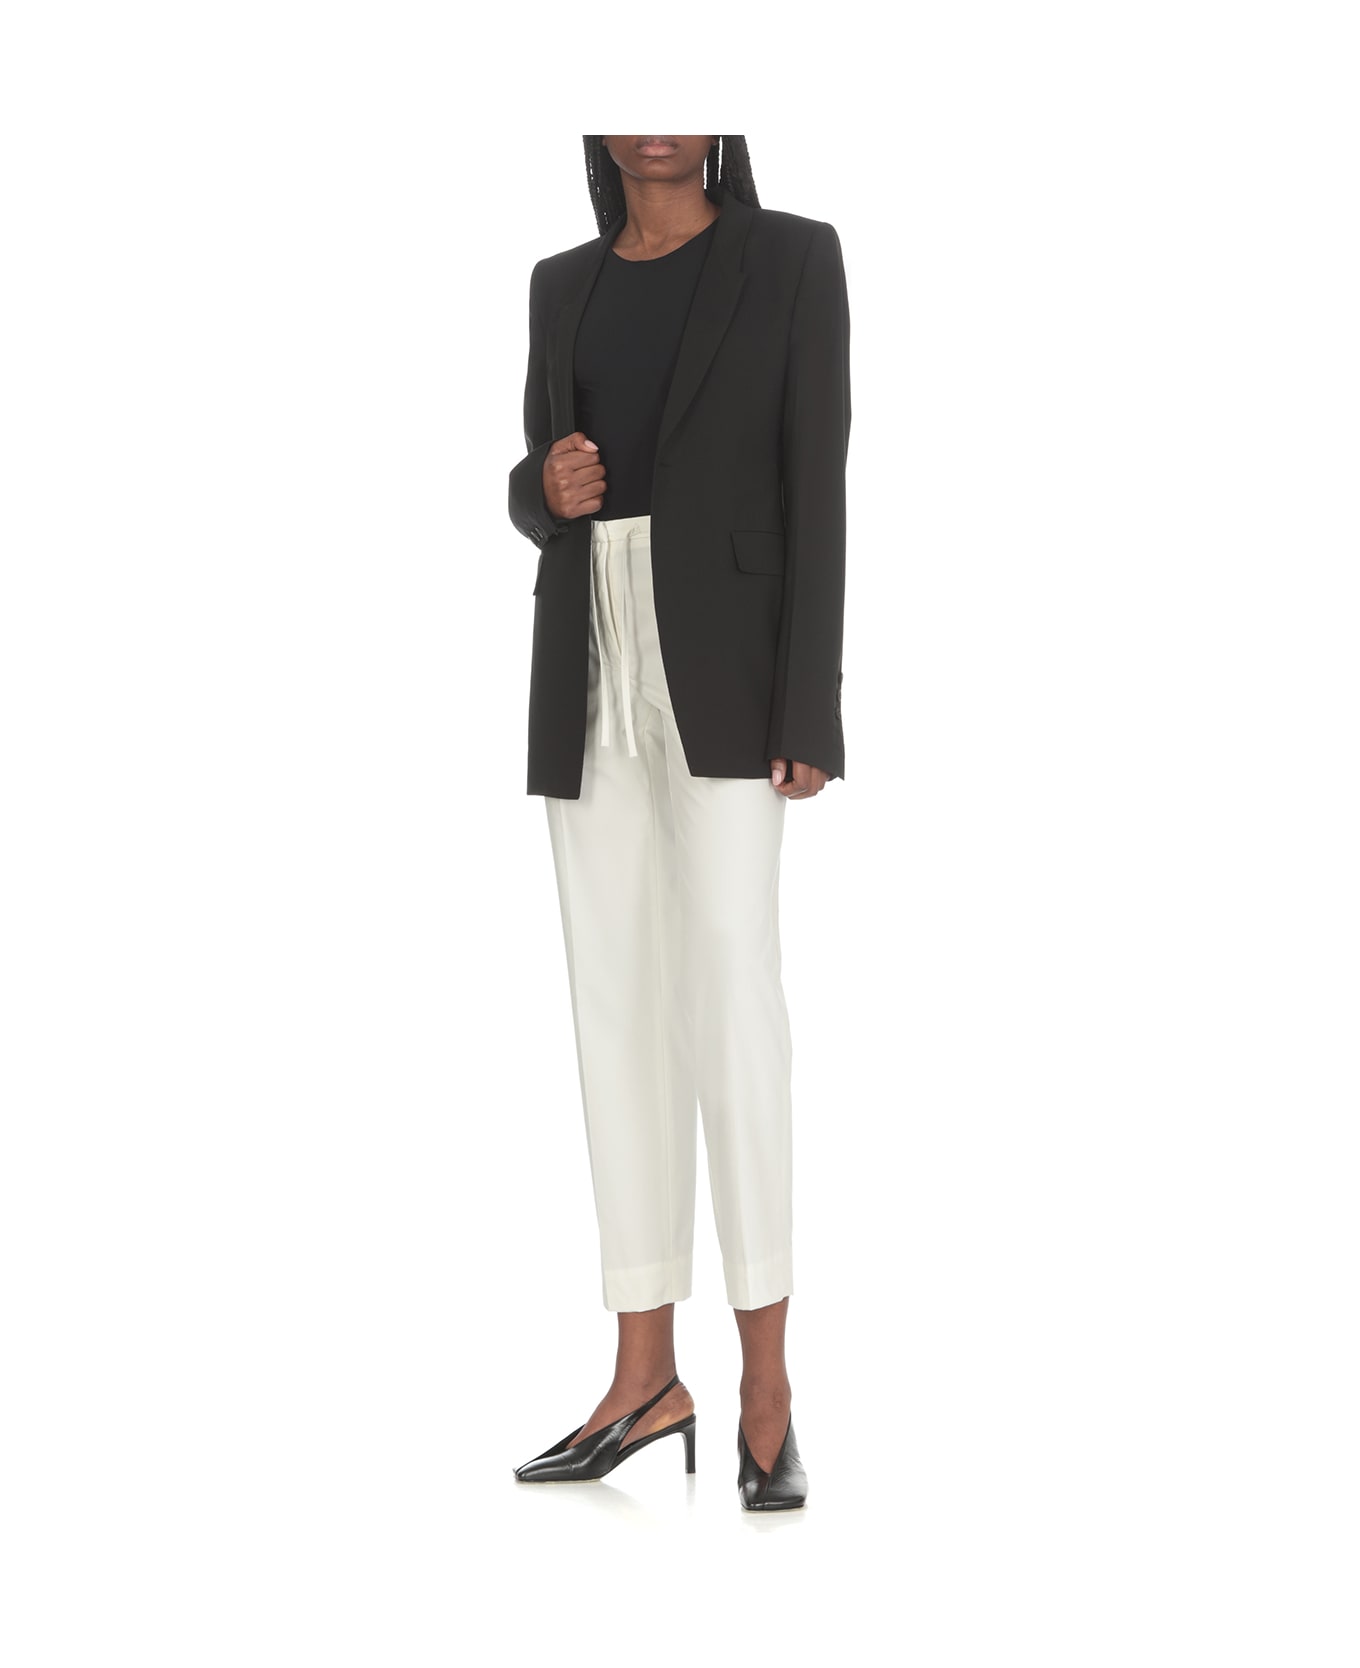 Jil Sander Cropped Cotton Trousers - Ivory ボトムス